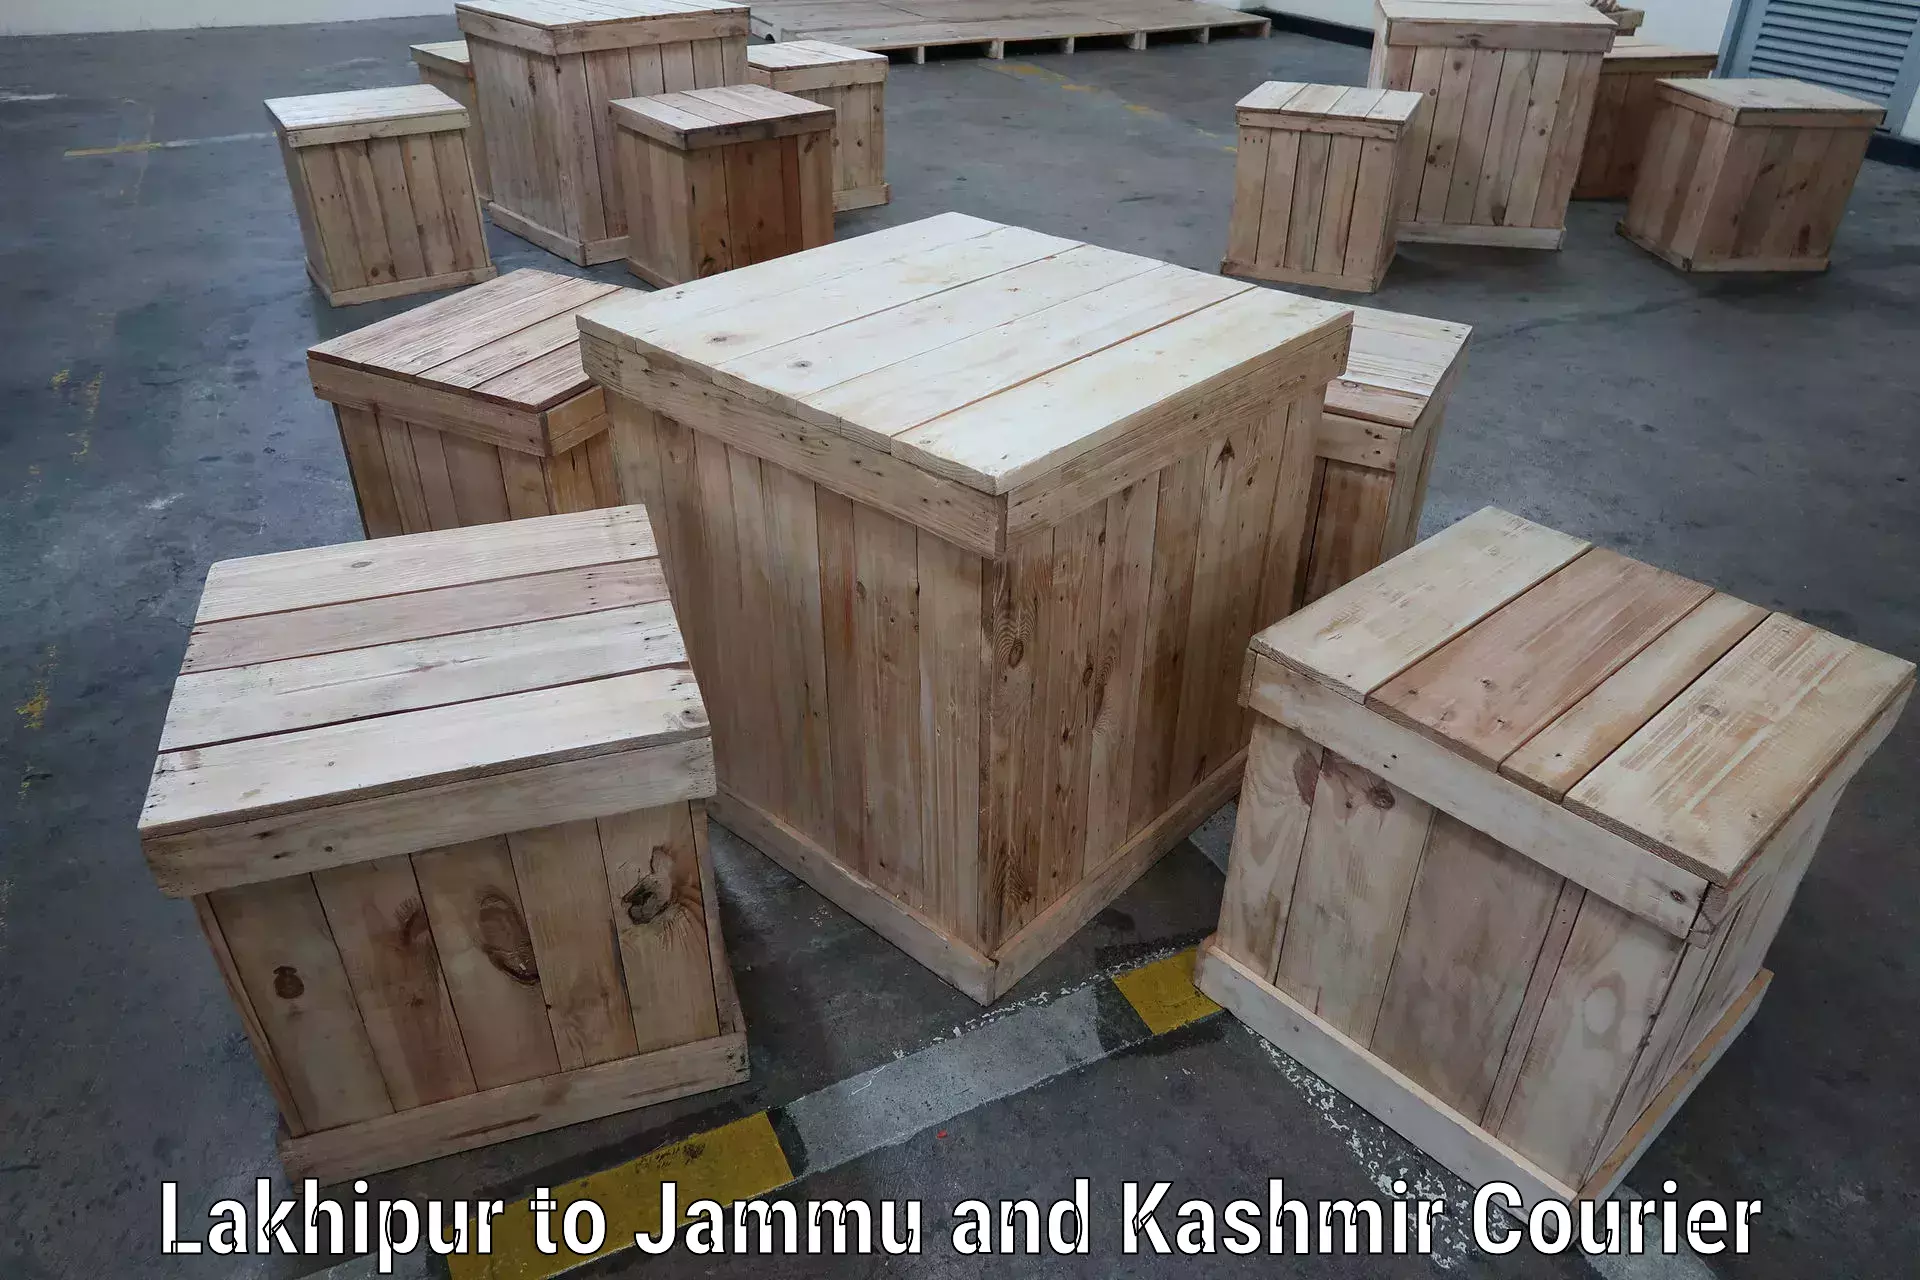 Reliable delivery network Lakhipur to Jammu and Kashmir